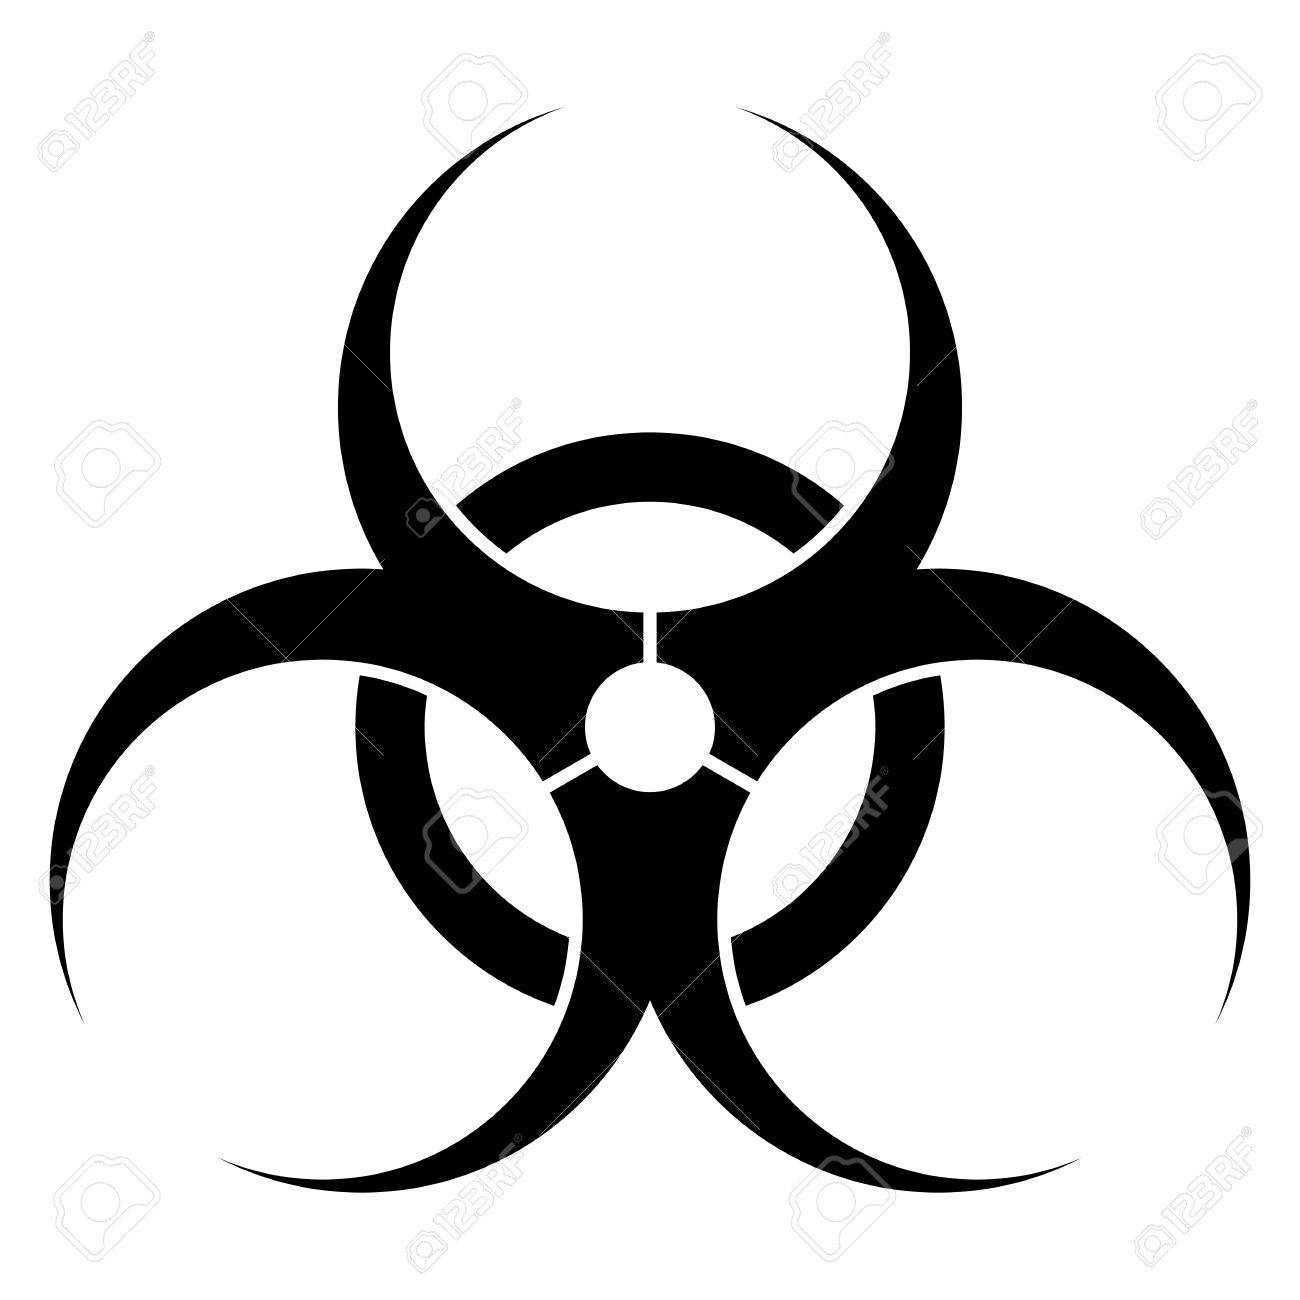 Biohazard: designed to be a memorable but meaningless symbol 